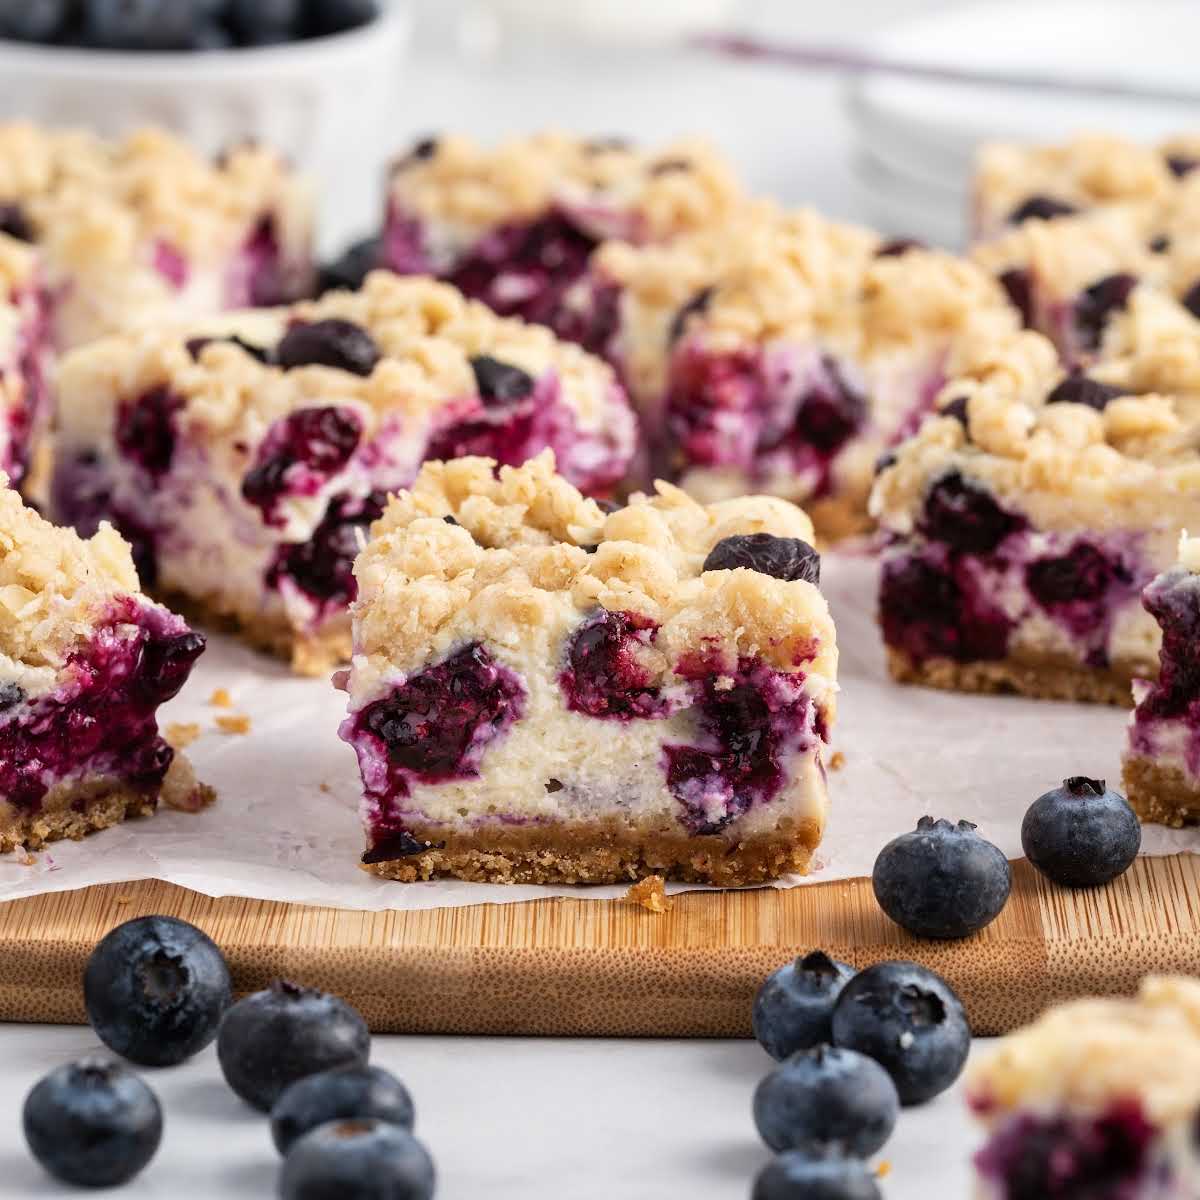 Blueberry Cheesecake Bars - Spaceships and Laser Beams